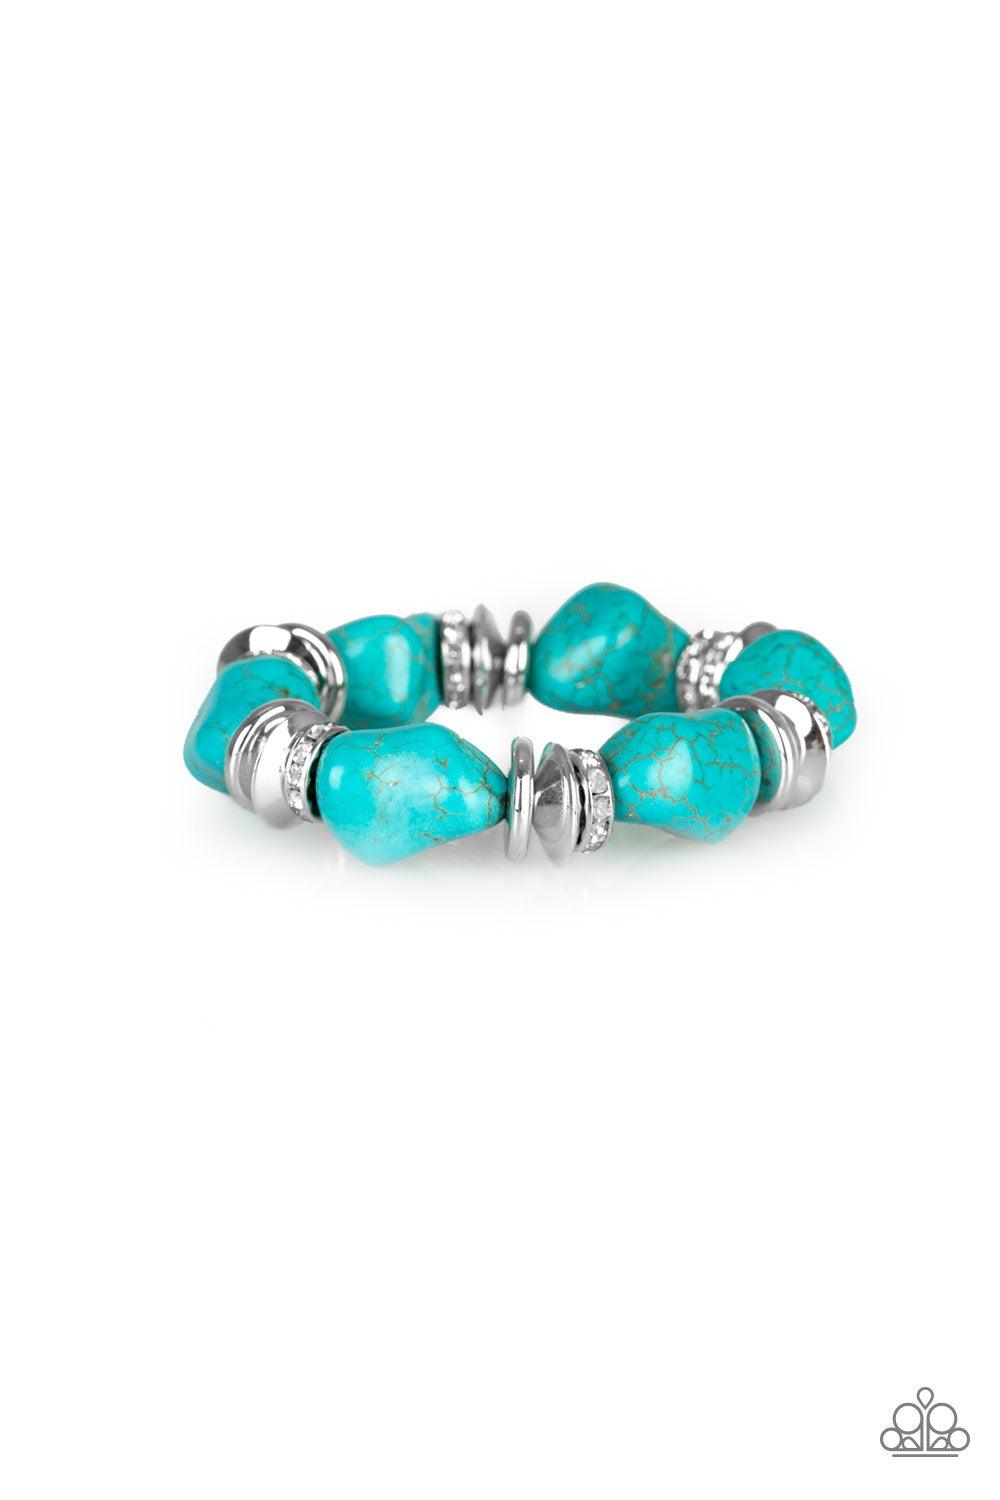 Paparazzi Accessories Stone Age Stunner - Blue A collection of refreshing turquoise stones, shimmery silver accents, and white rhinestone encrusted rings are threaded along a stretchy band around the wrist for a seasonal look. Jewelry